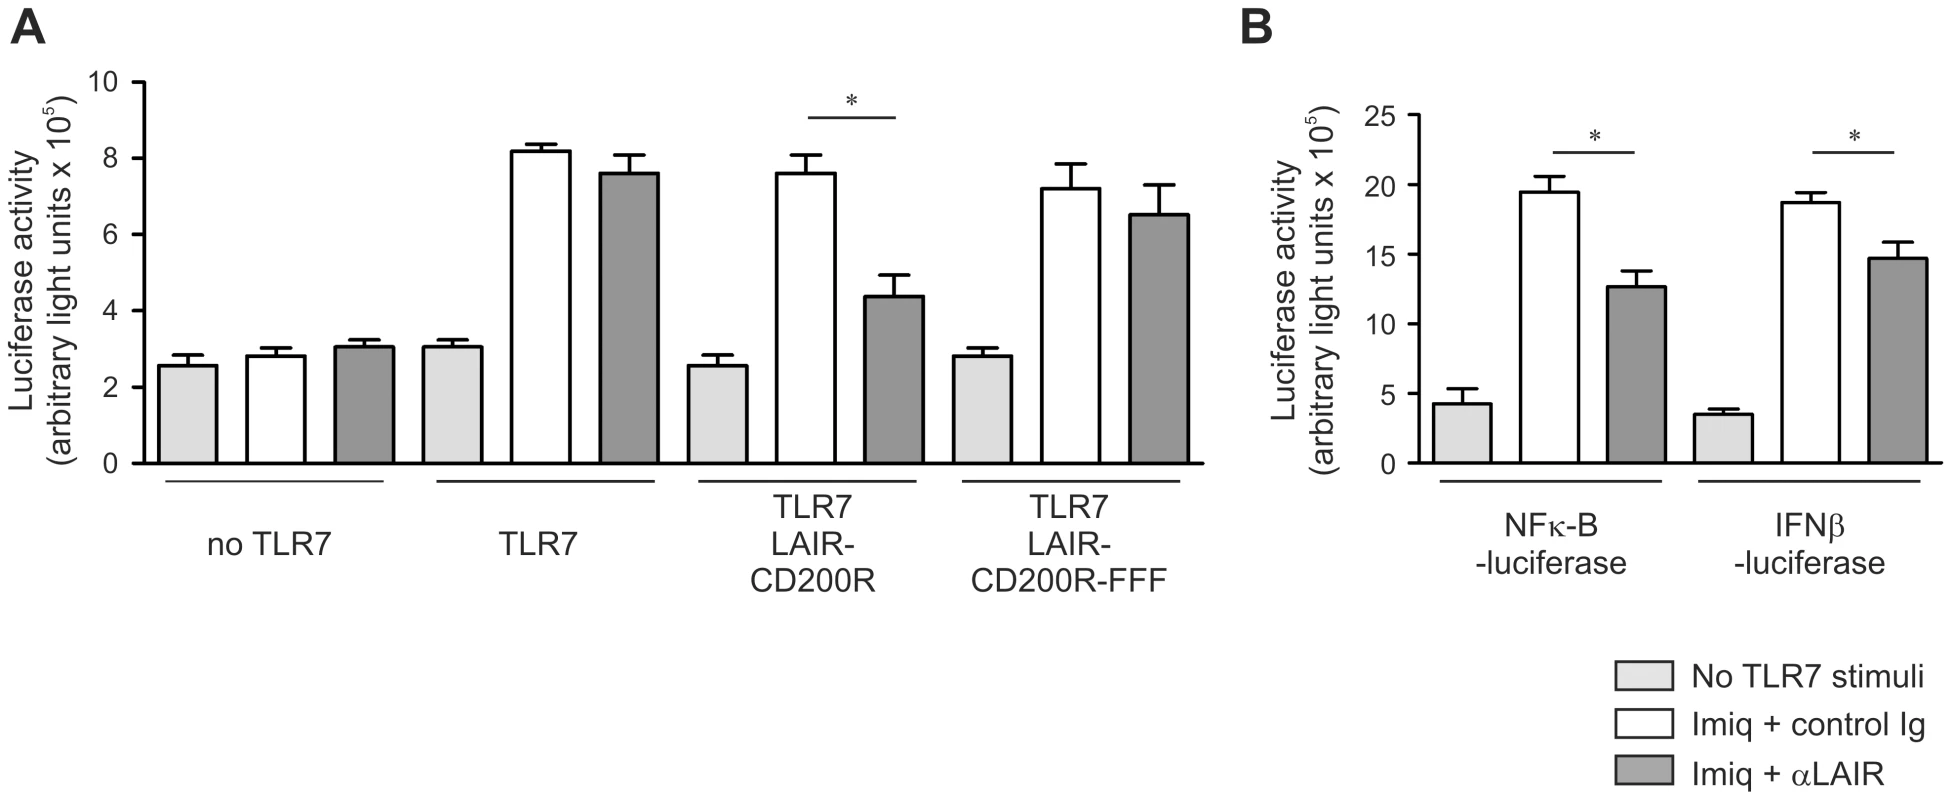 Stimulation of CD200R directly inhibits TLR mediated NFκB activity.